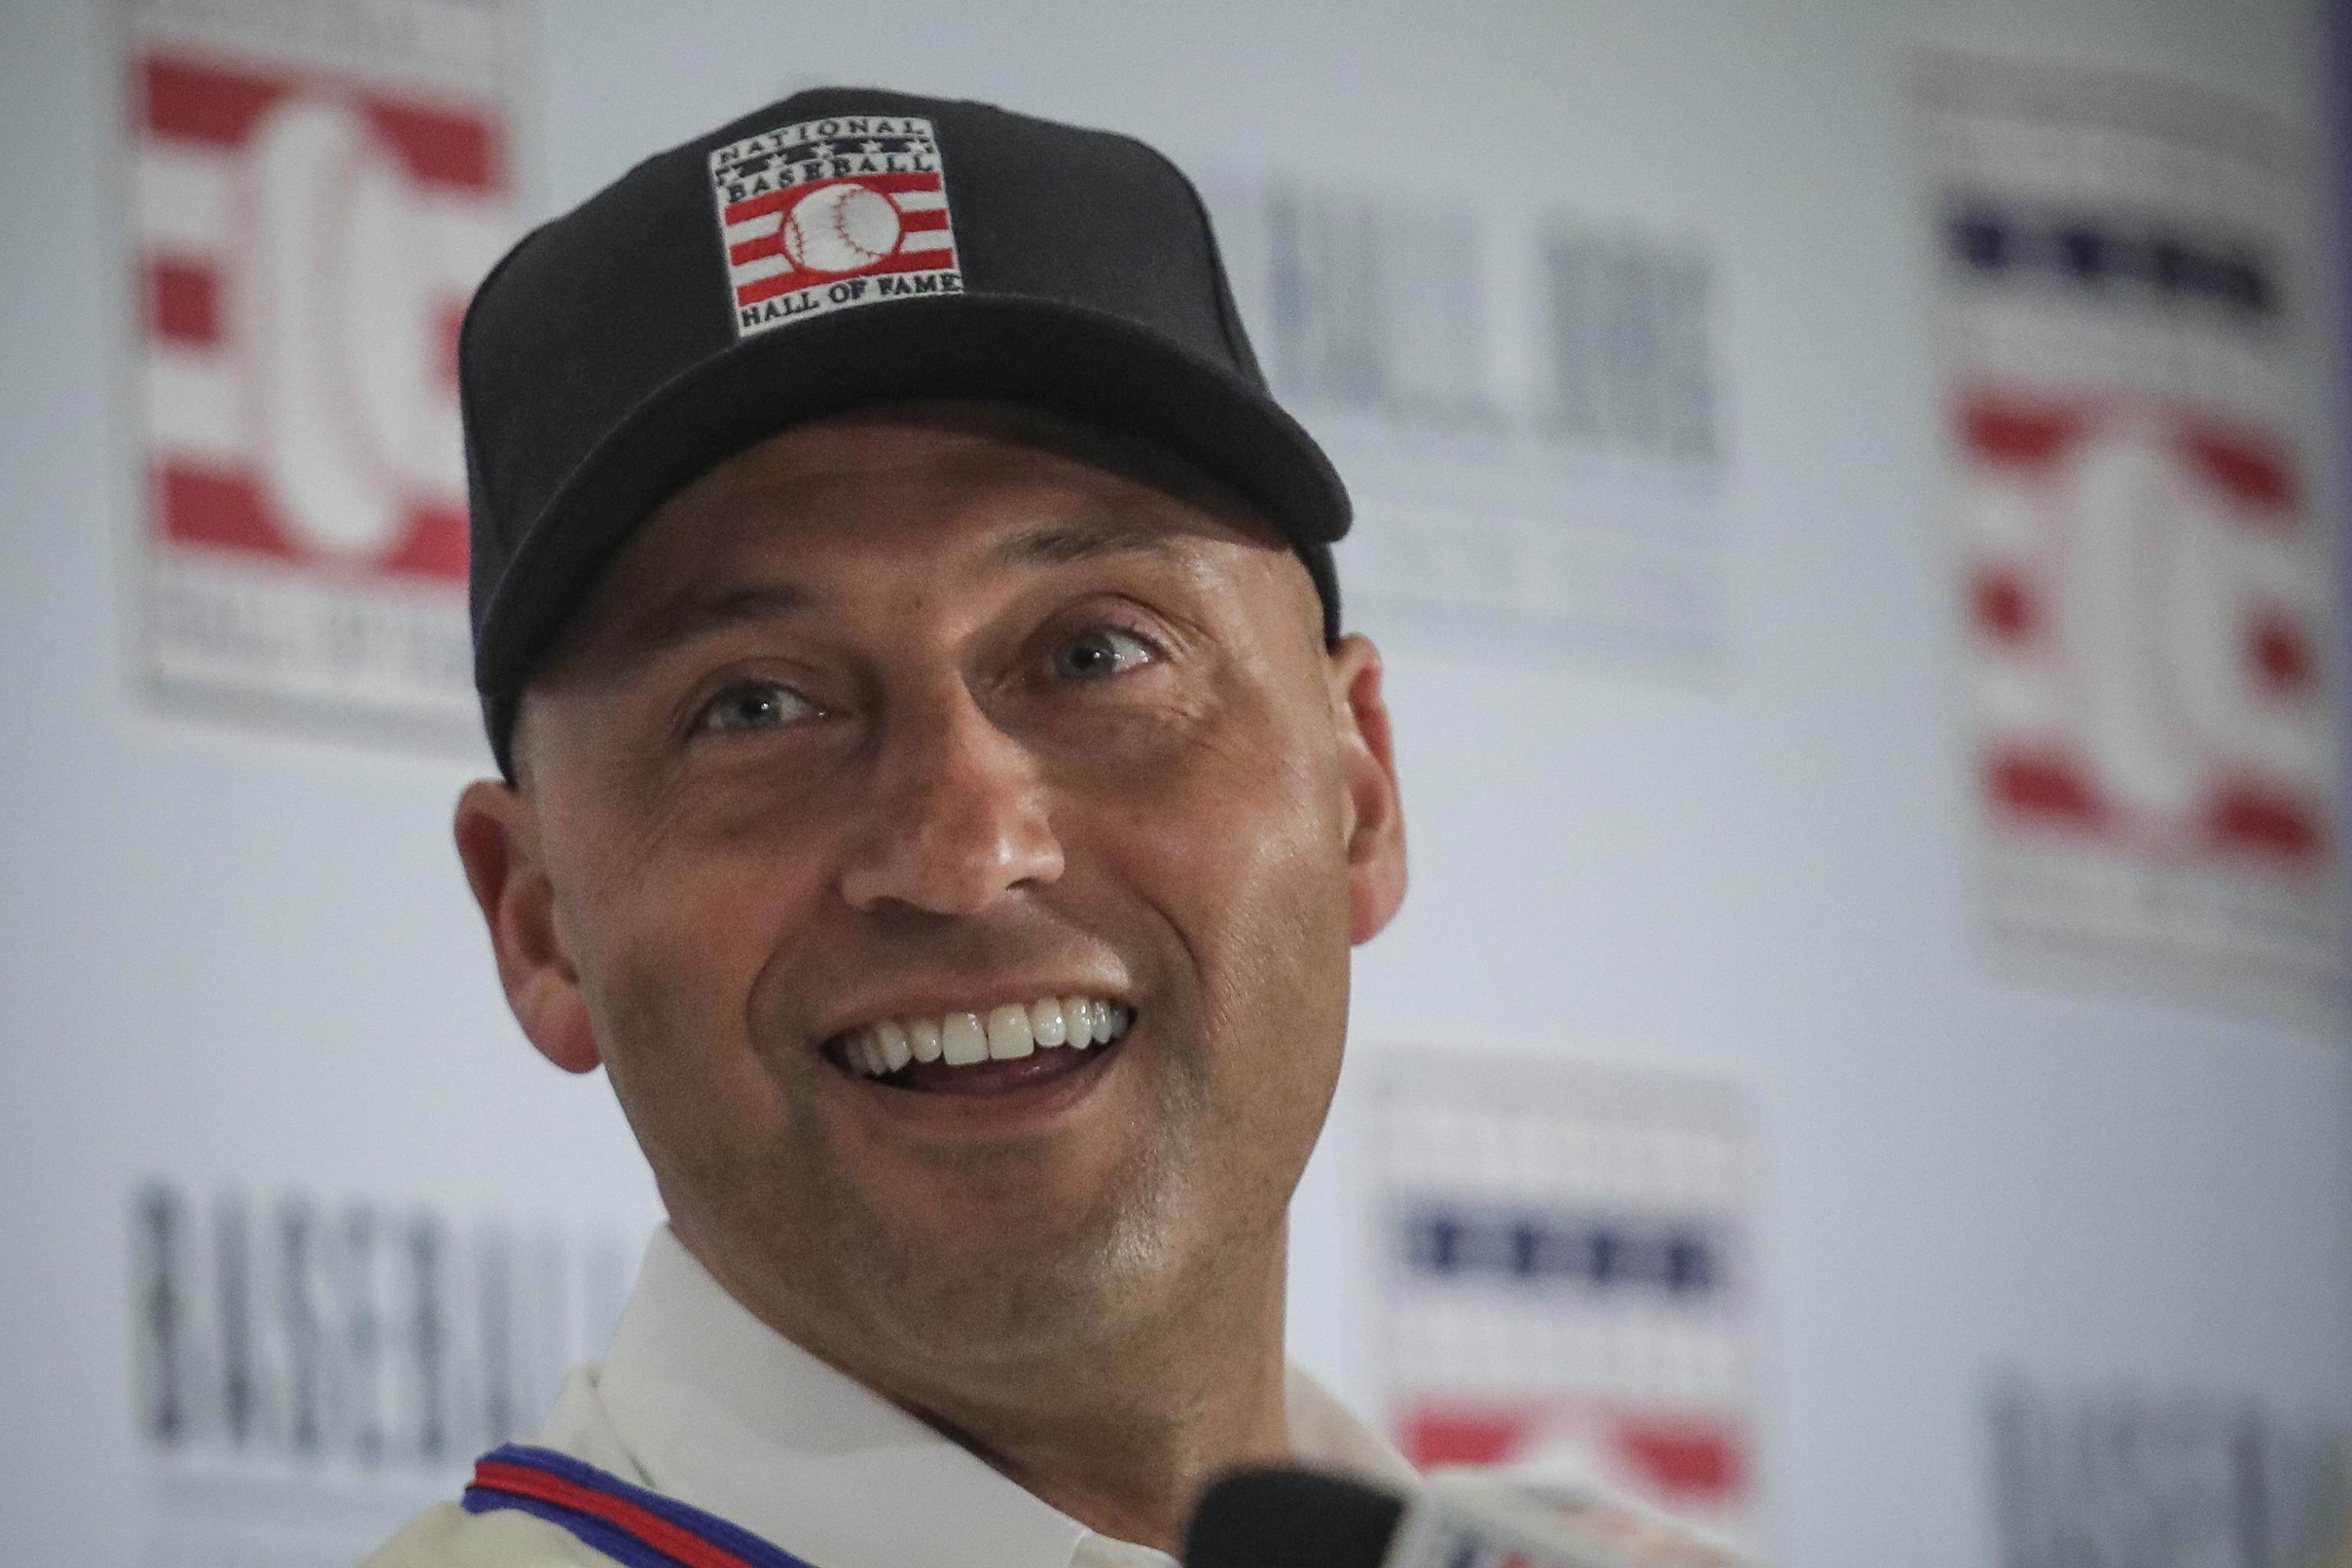 Derek Jeter nearly unanimously voted into Baseball Hall of Fame